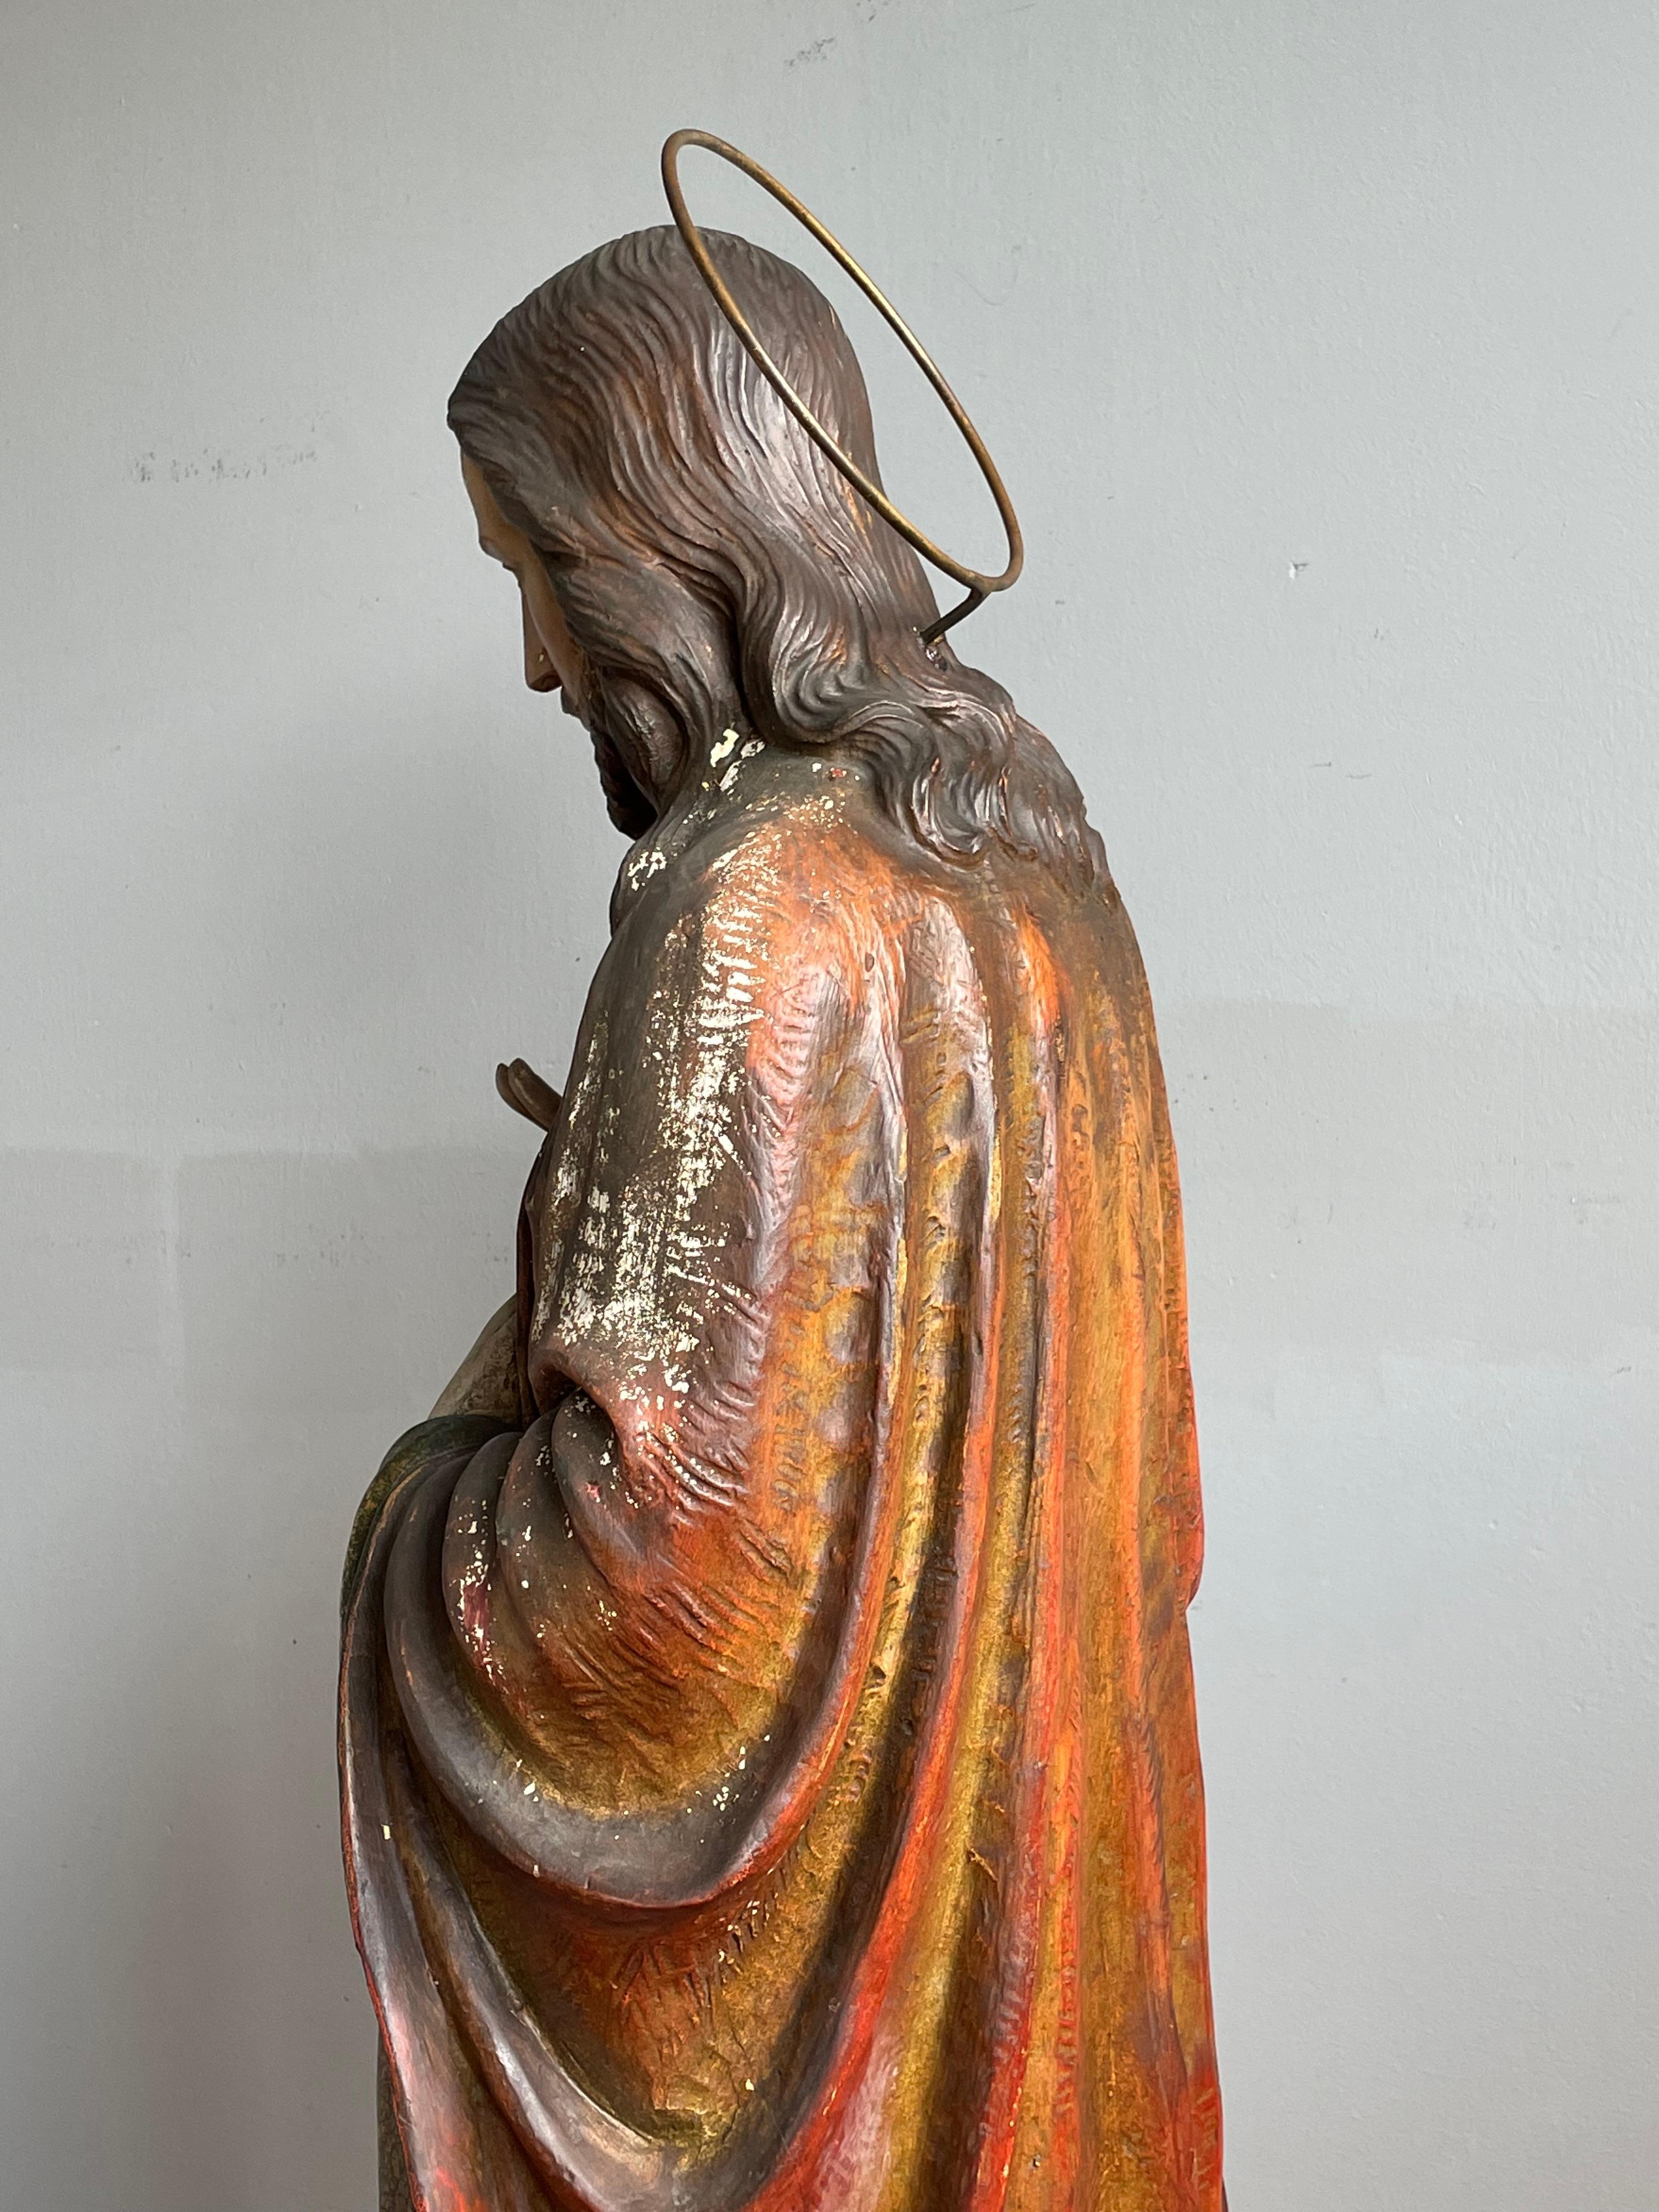 Cast Antique & Rare Hand Painted Plaster, Church Sculpture or Statue of Jesus Christ For Sale